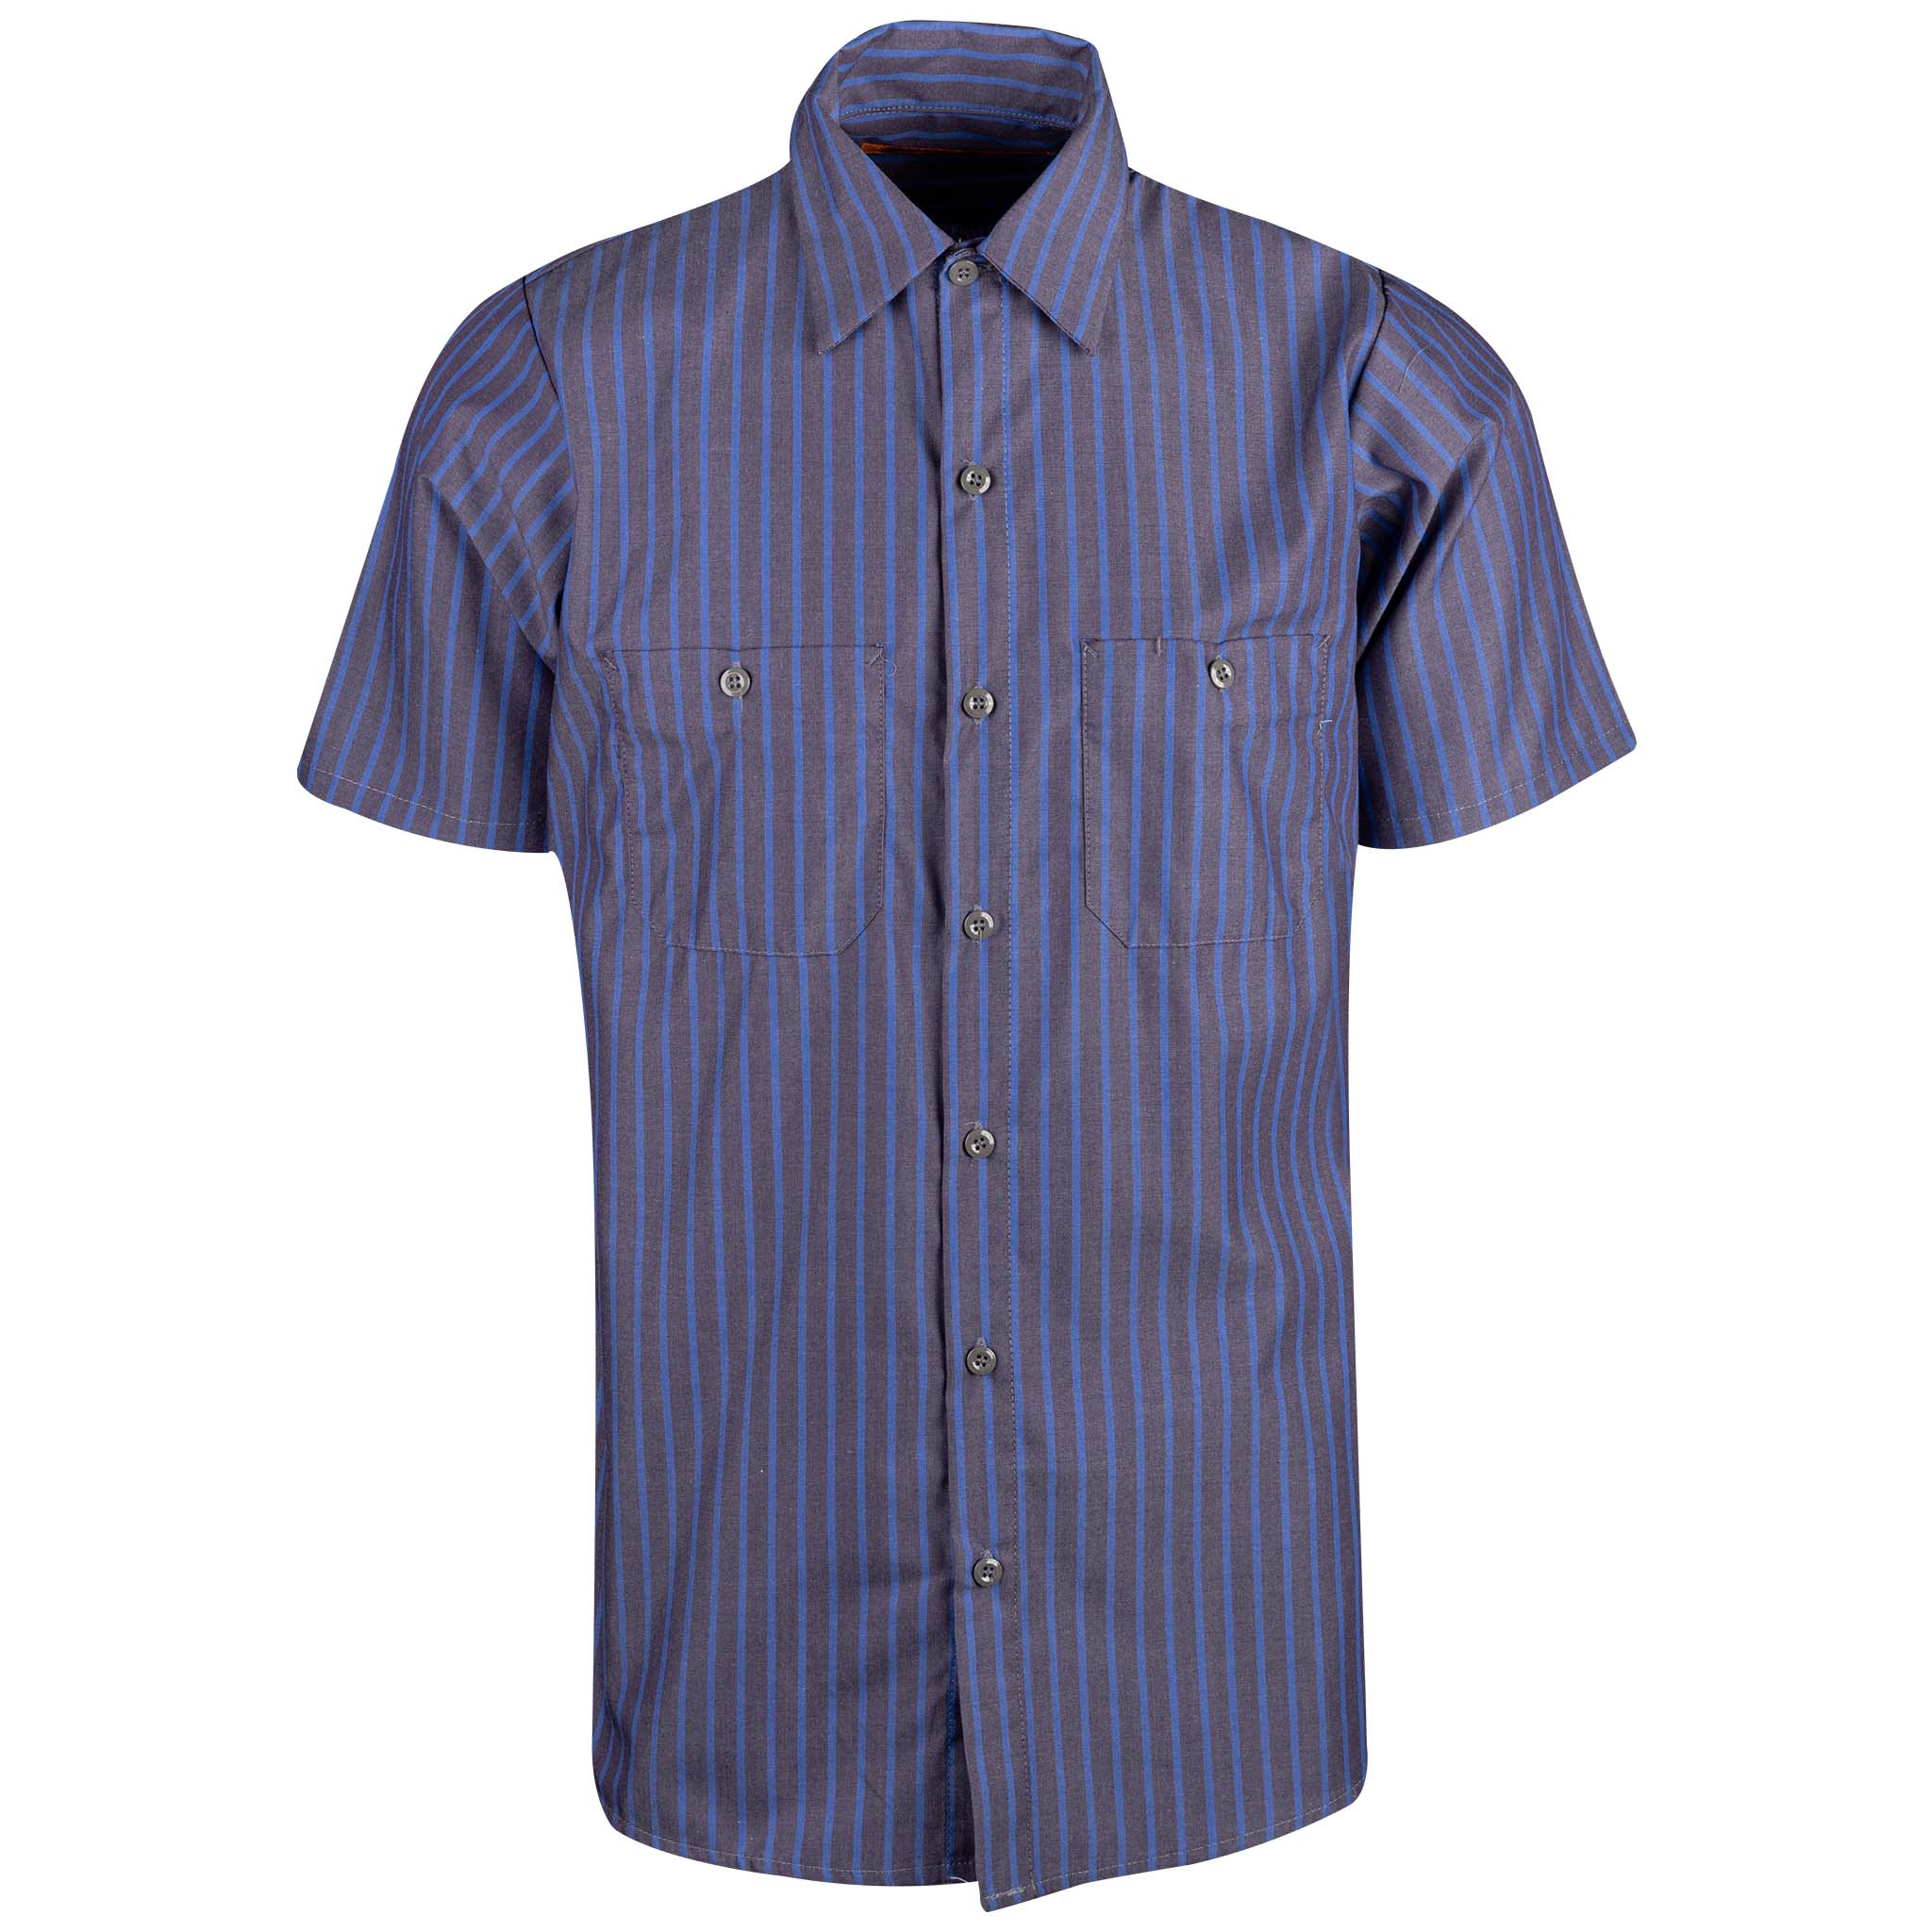 Industrial Work Shirt Blue/Charcoal Stripe Front